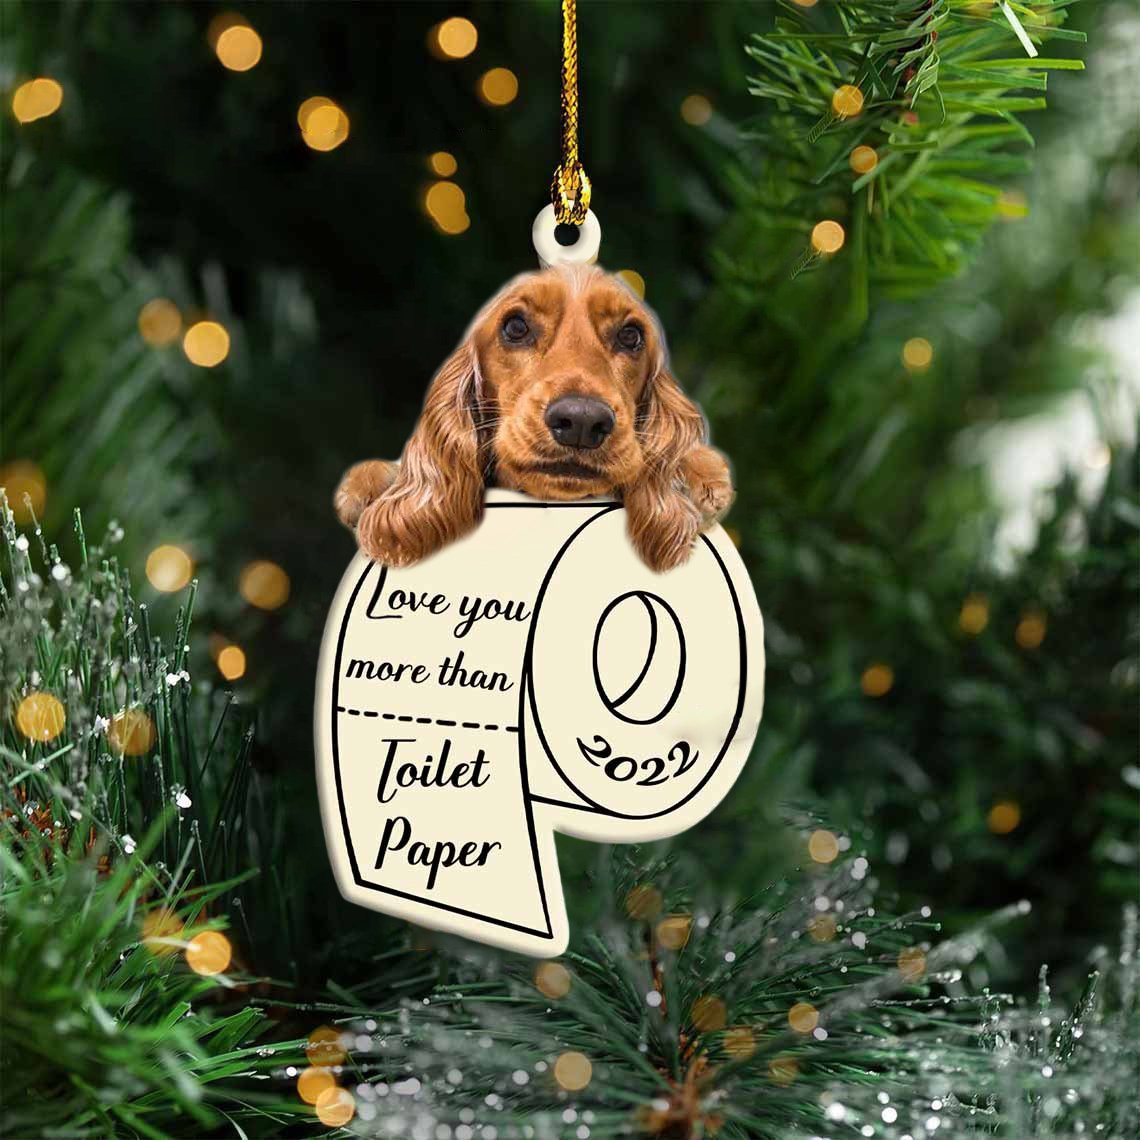 Cocker Spaniel Love You More Than Toilet Paper 2022 Hanging Ornament